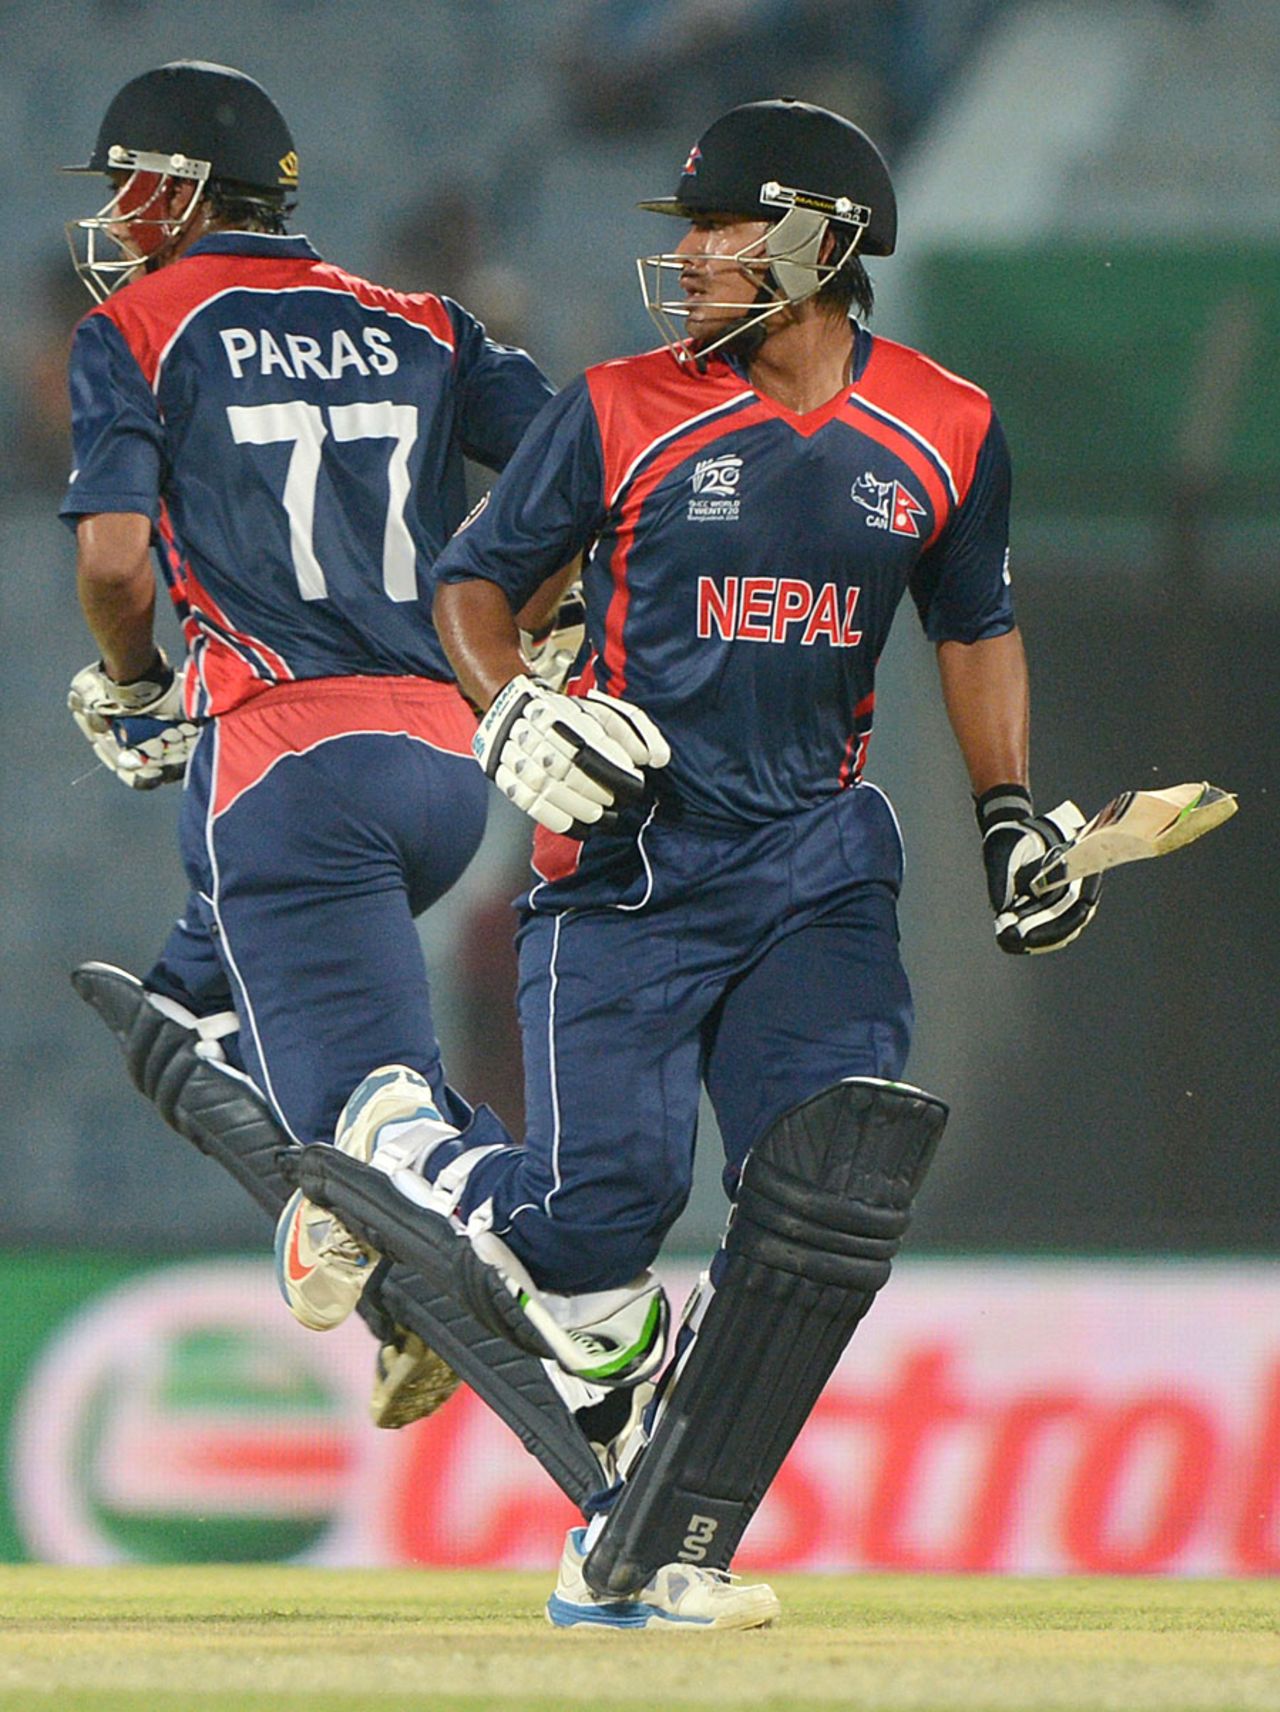 Paras Khadka and Gyanendra Malla added 80 for the third wicket, Hong Kong v Nepal, World T20, Qualifying Group A, Chittagong, March 16, 2014 